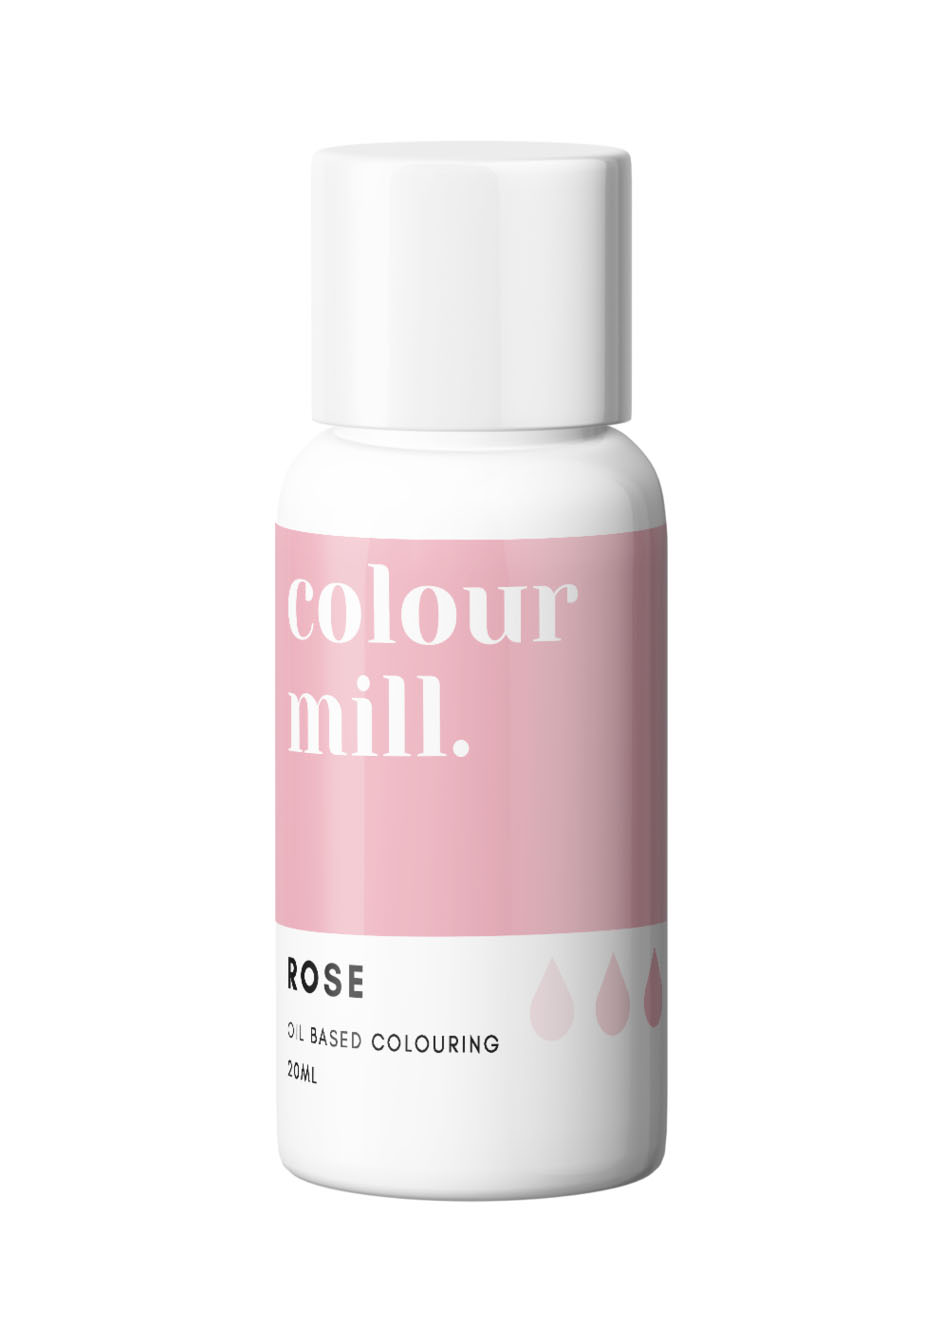 Colour Mill Rose Colouring 20ml